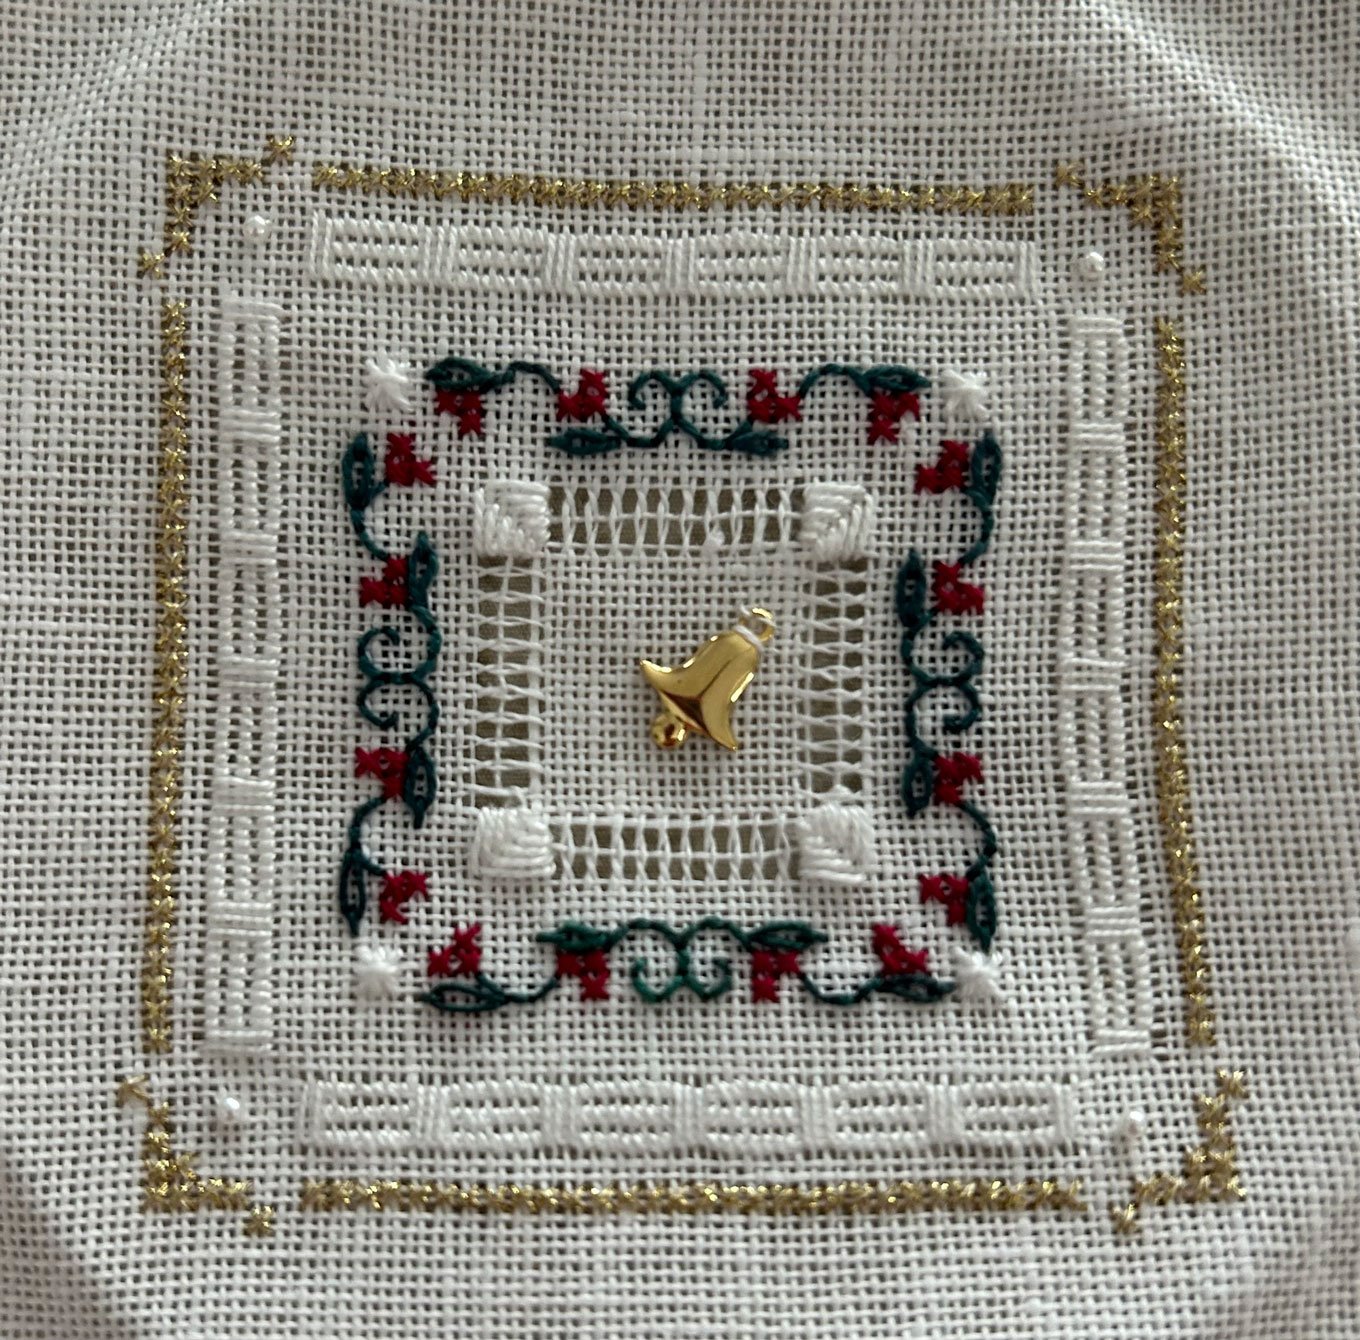 Tudor Rose featuring Four Sided Pulled Stitch & Hemstitch